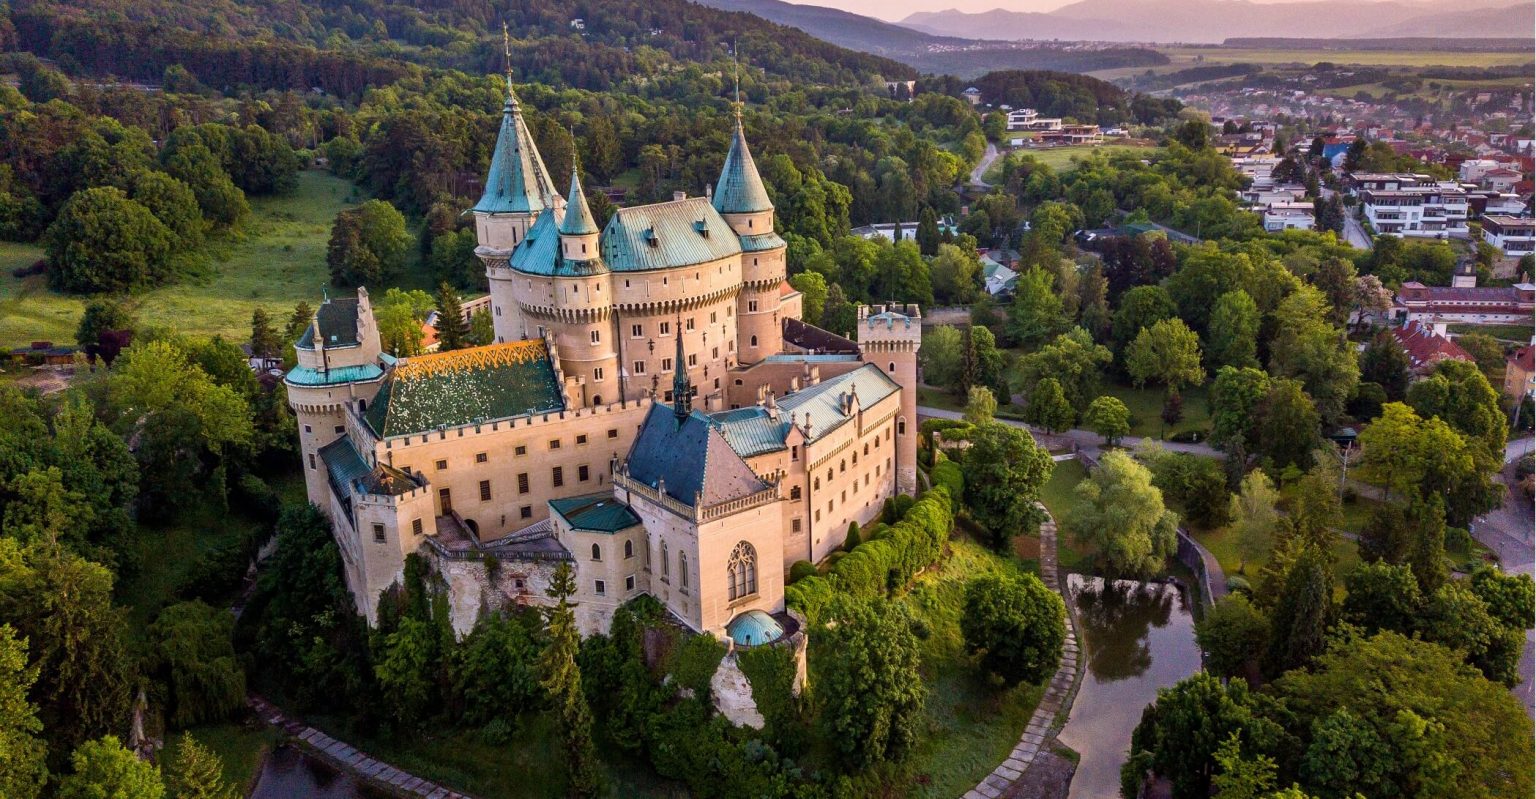 10 best places to visit in slovakia